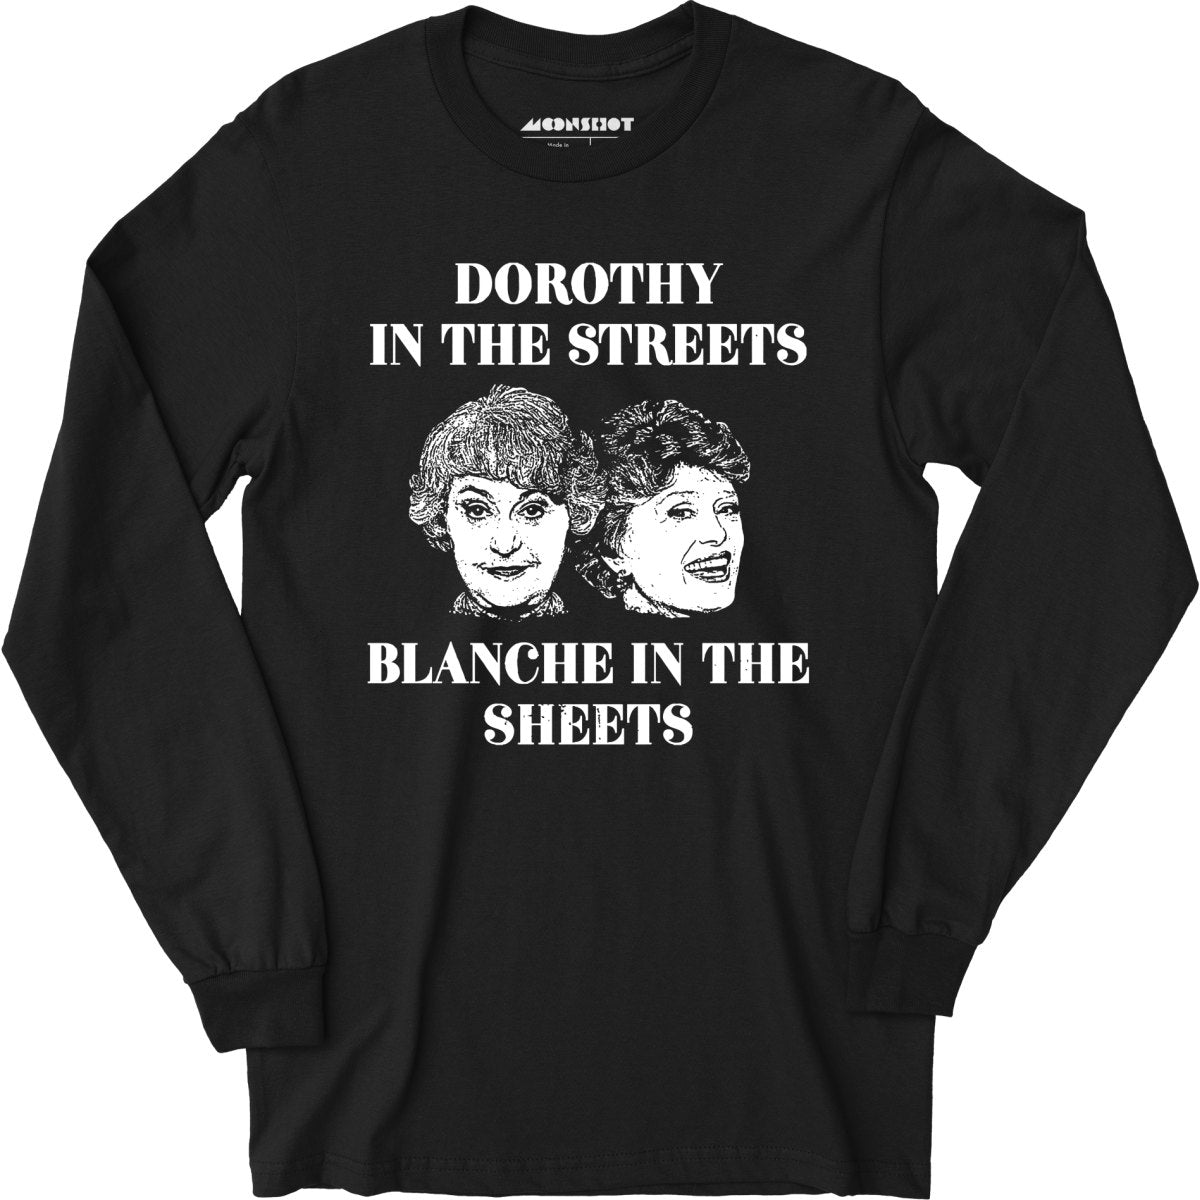 Dorothy in the Streets Blanche in the Sheets - Long Sleeve T-Shirt